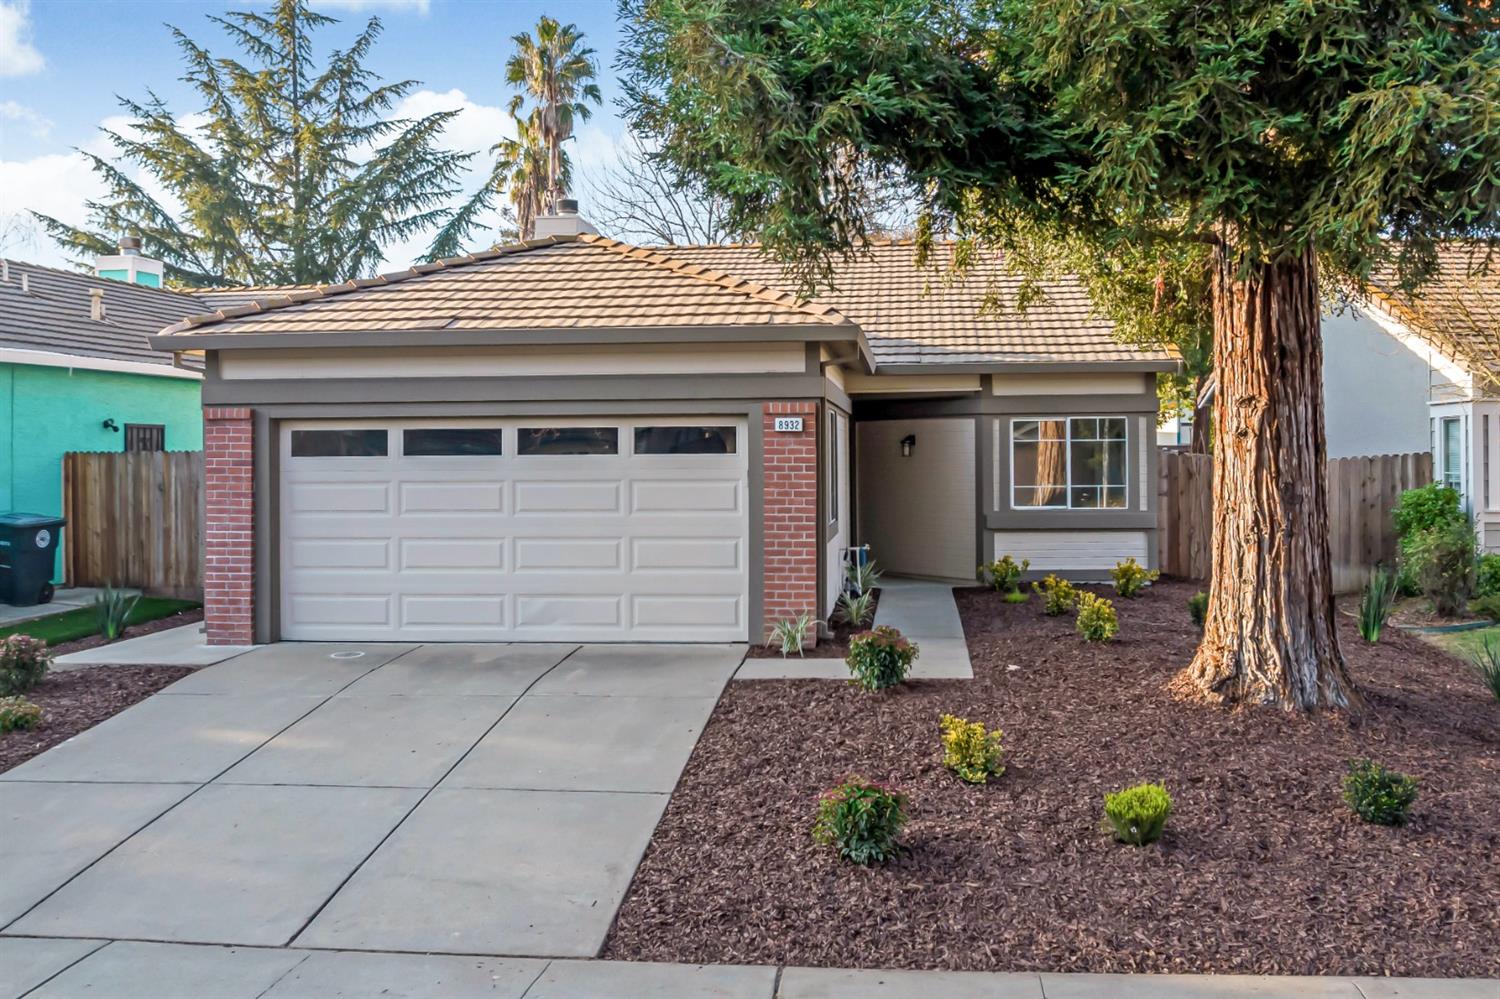 Charming Elk Grove home with great curb appeal. Fresh new landscaping invites you into the warm cozy